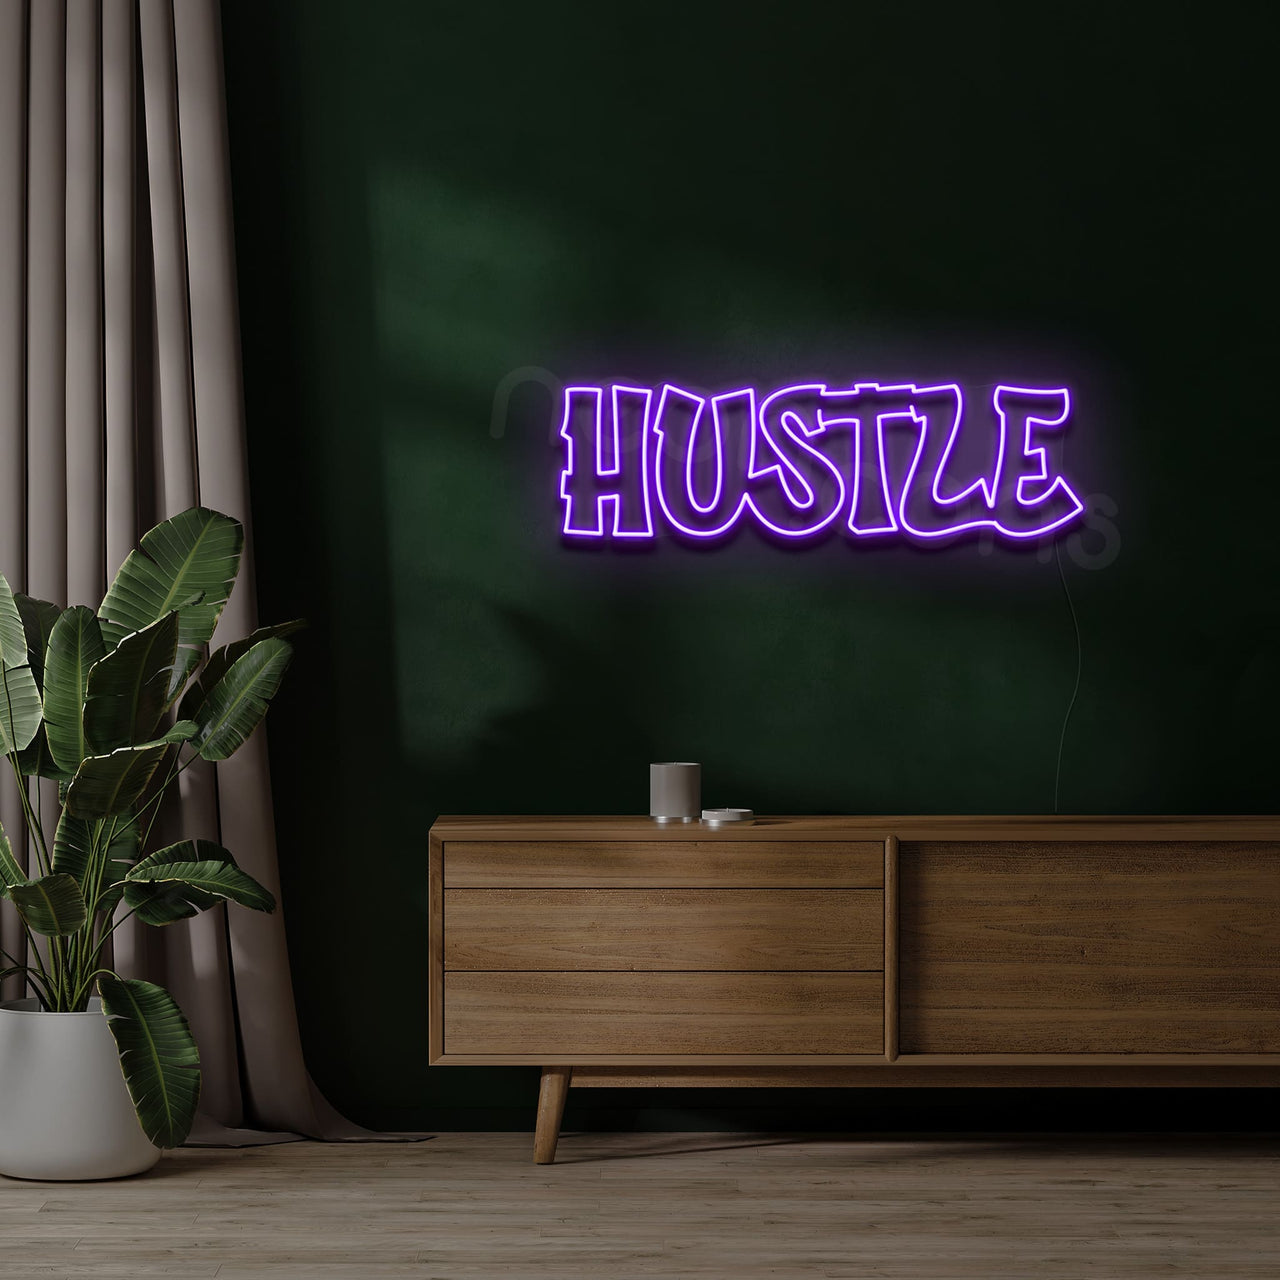 "Hustle" Neon Sign by Neon Icons